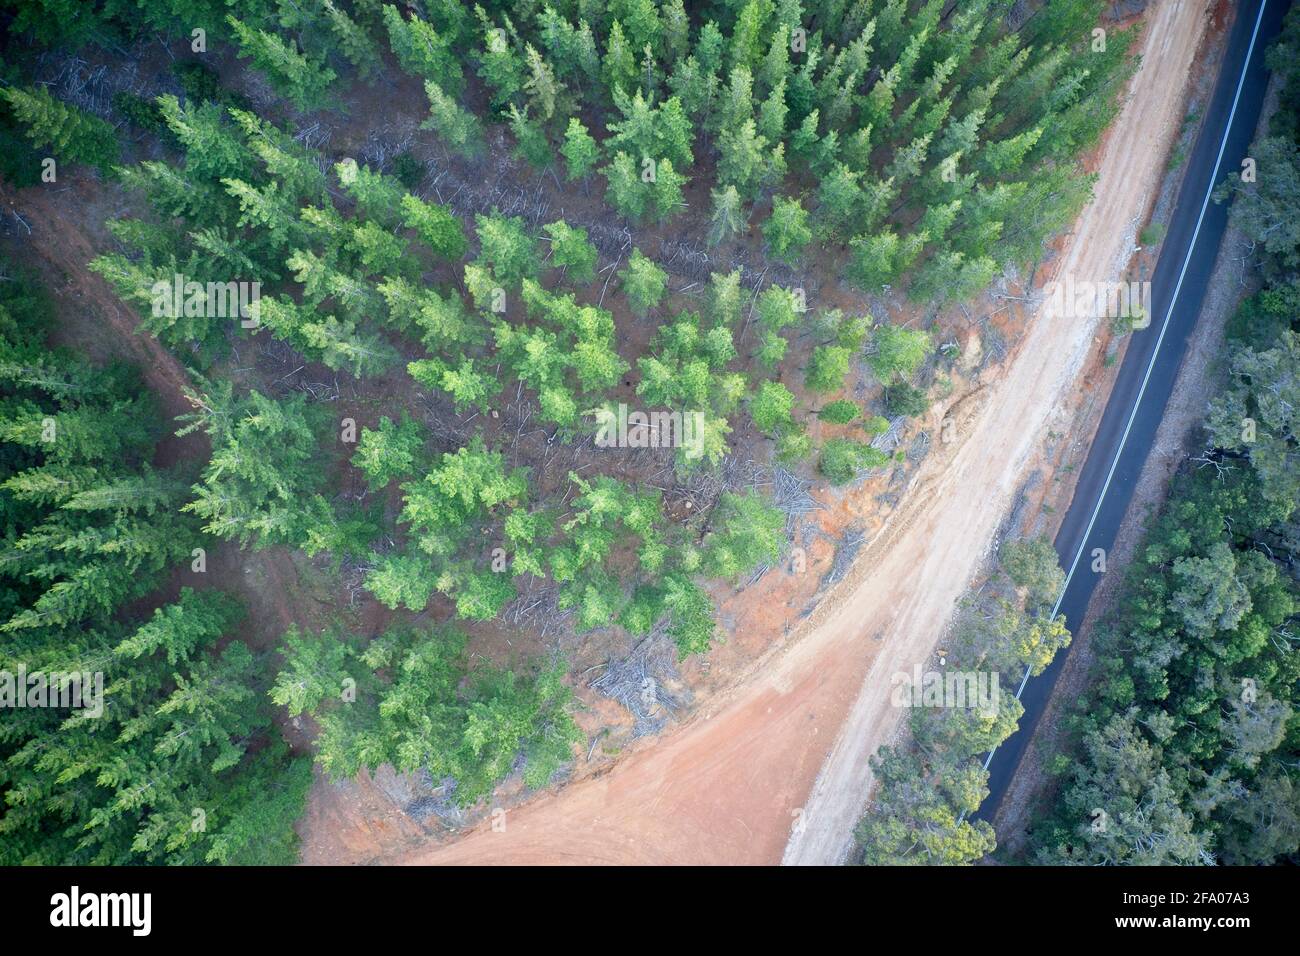 Drone view of road intersecting forest Balingup, Western Australia. Stock Photo